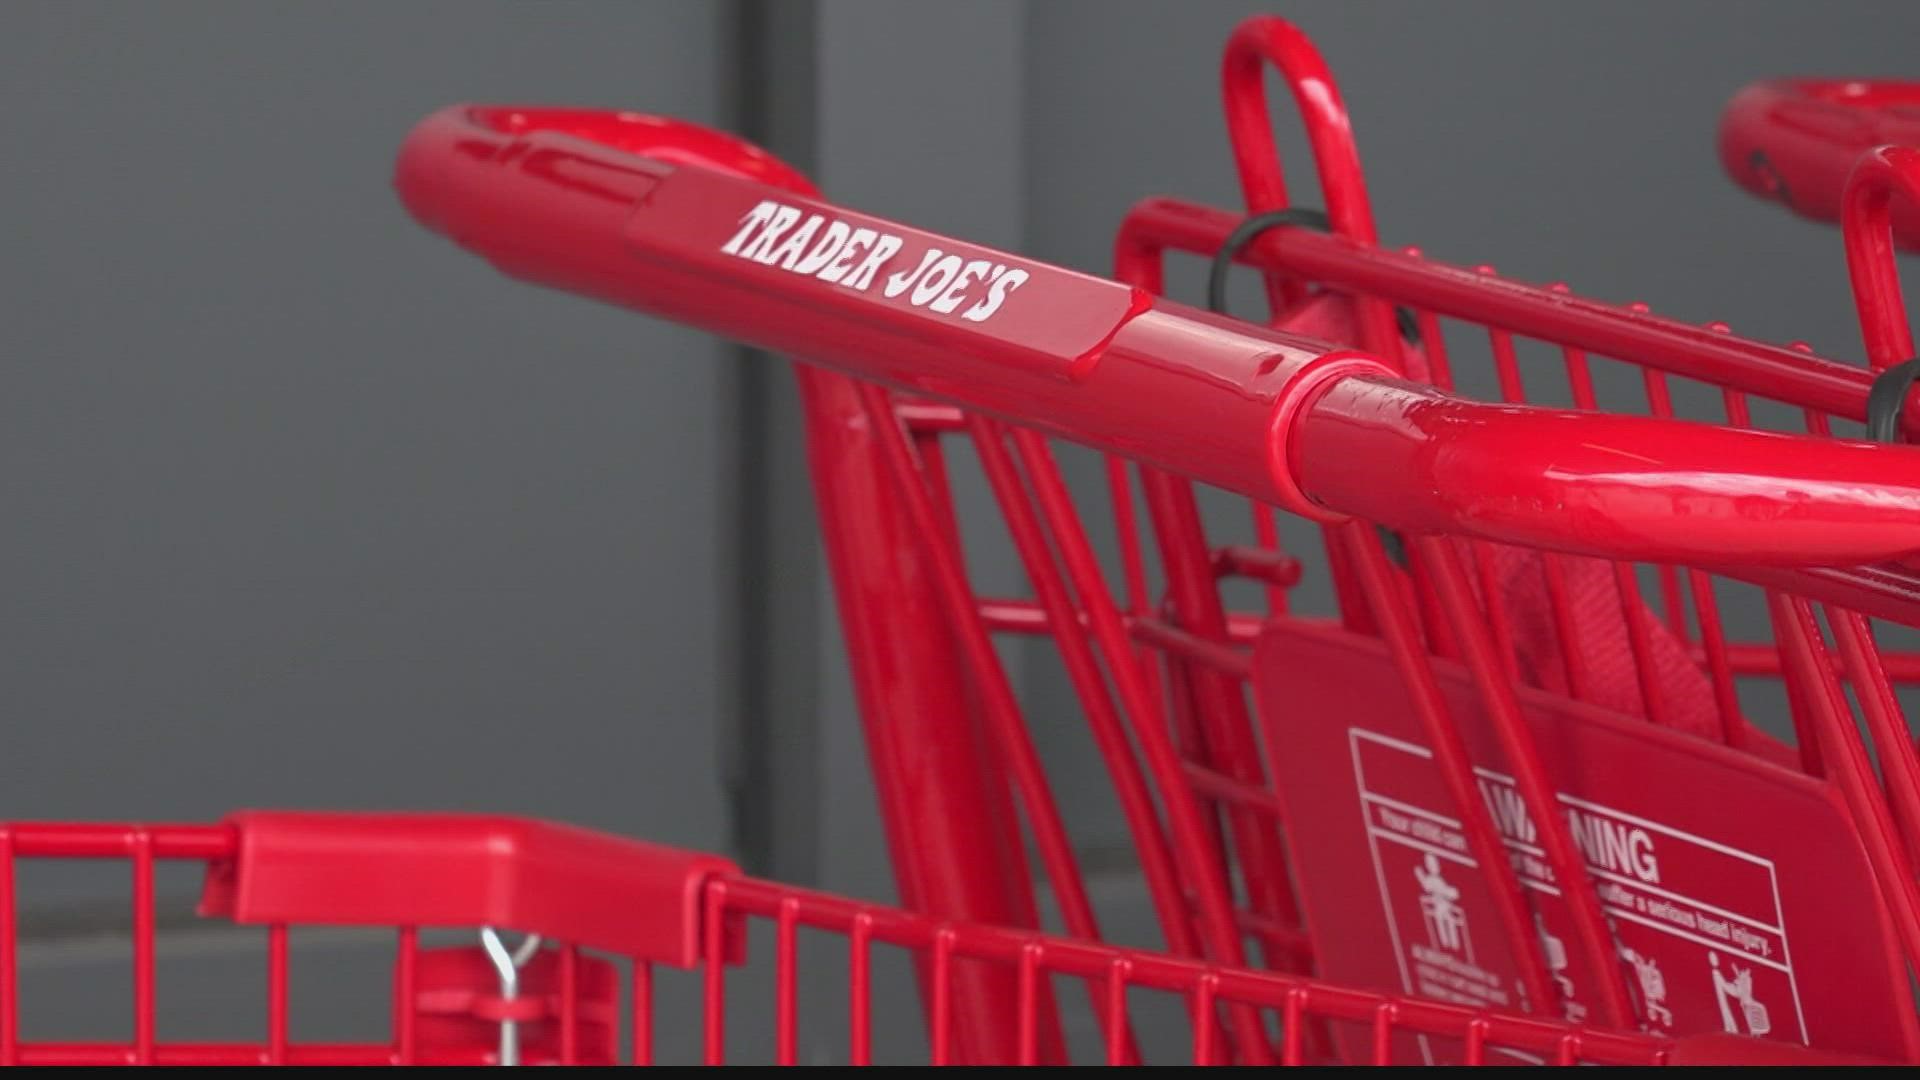 After years of watching and waiting, fans of Trader Joe's will be able to shop their Huntsville store on Sept. 30.